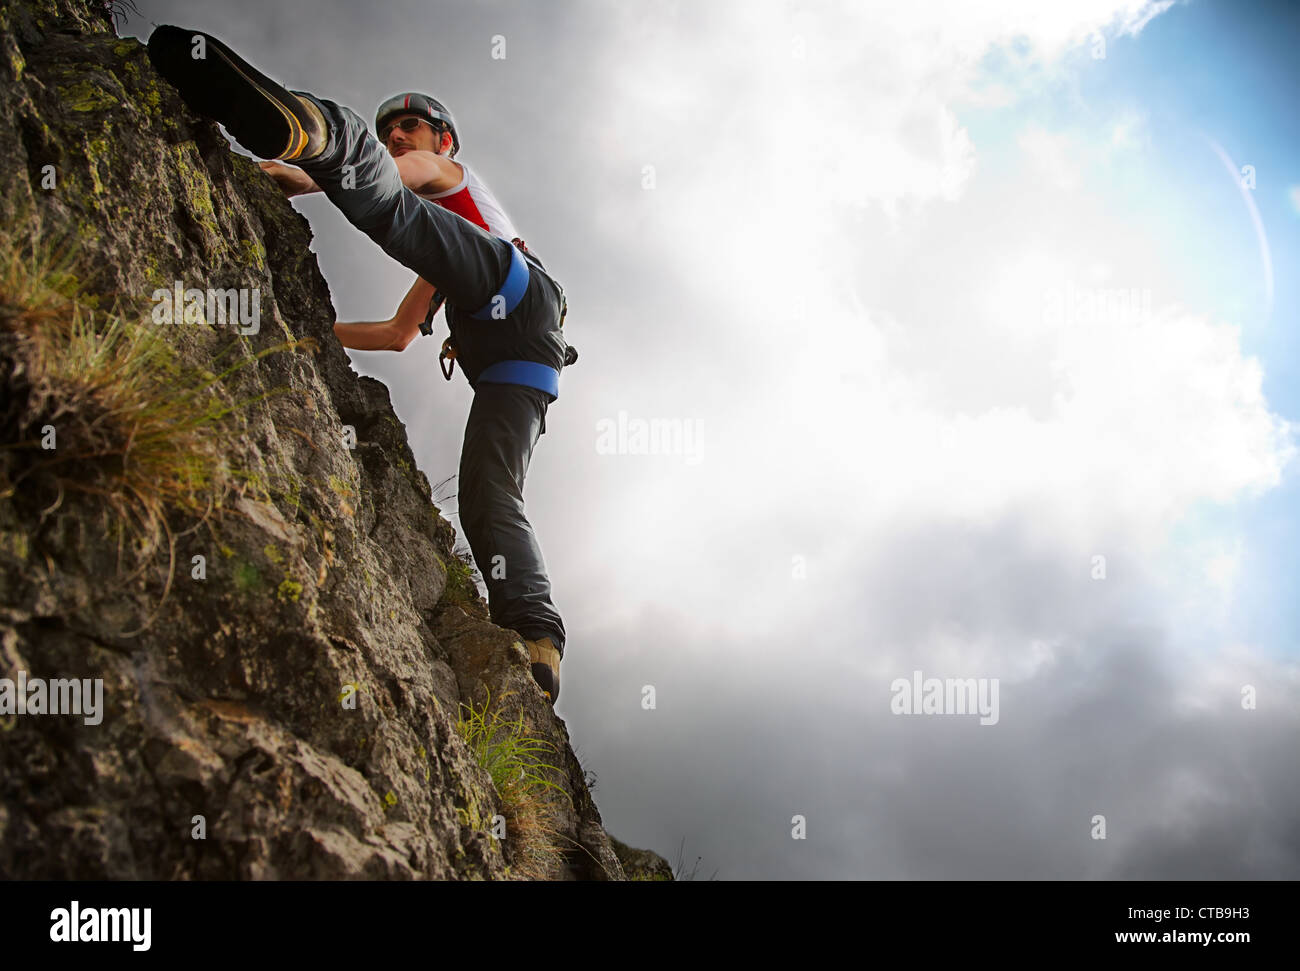 White young male rock-climber summer season upward view horizonzal frame vibrant colours back-light copy-space on right Stock Photo